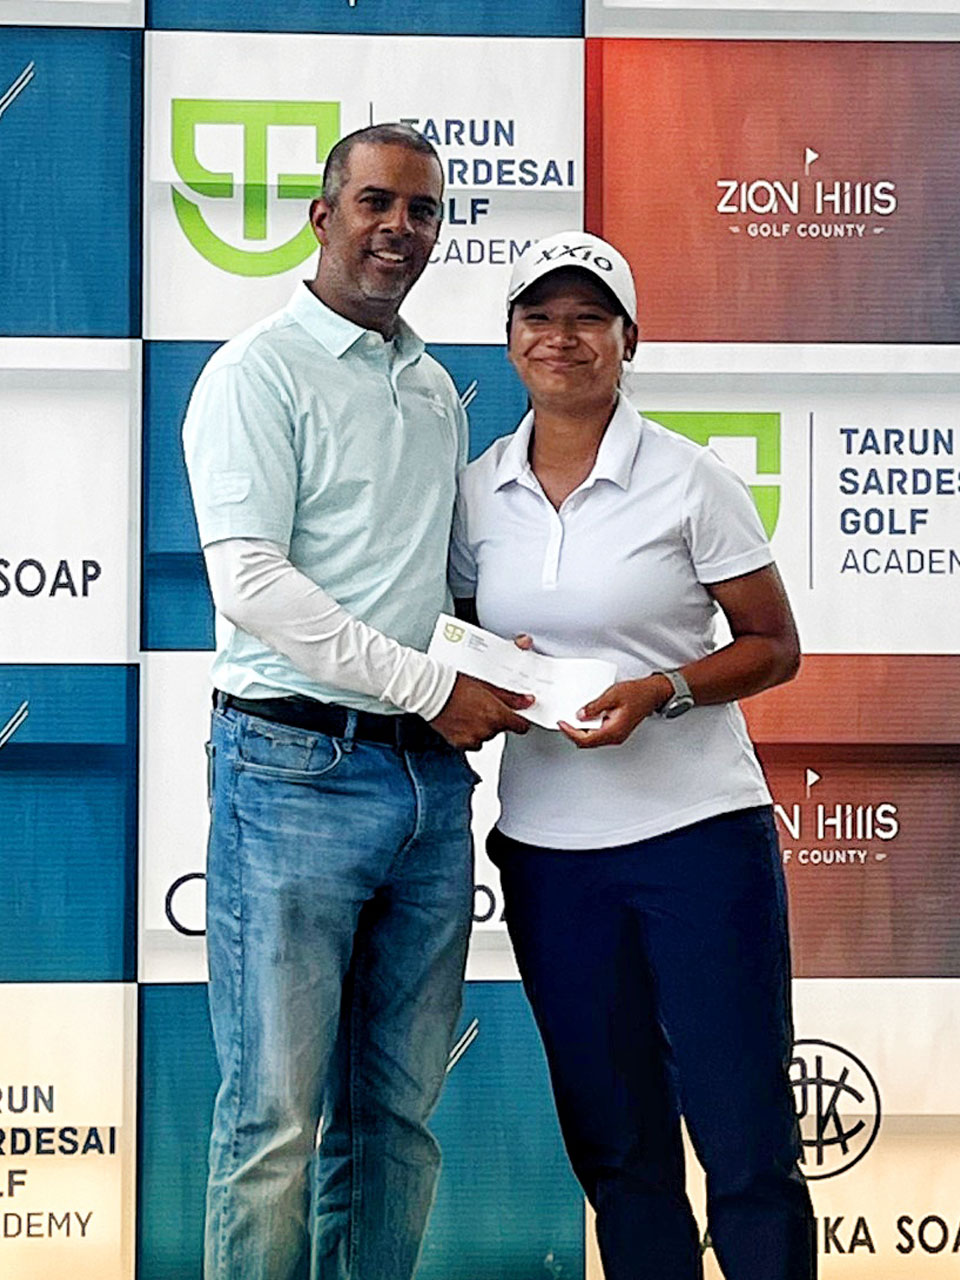 Kashmira Shah finished 3rd in the Open Amateur Women's Category